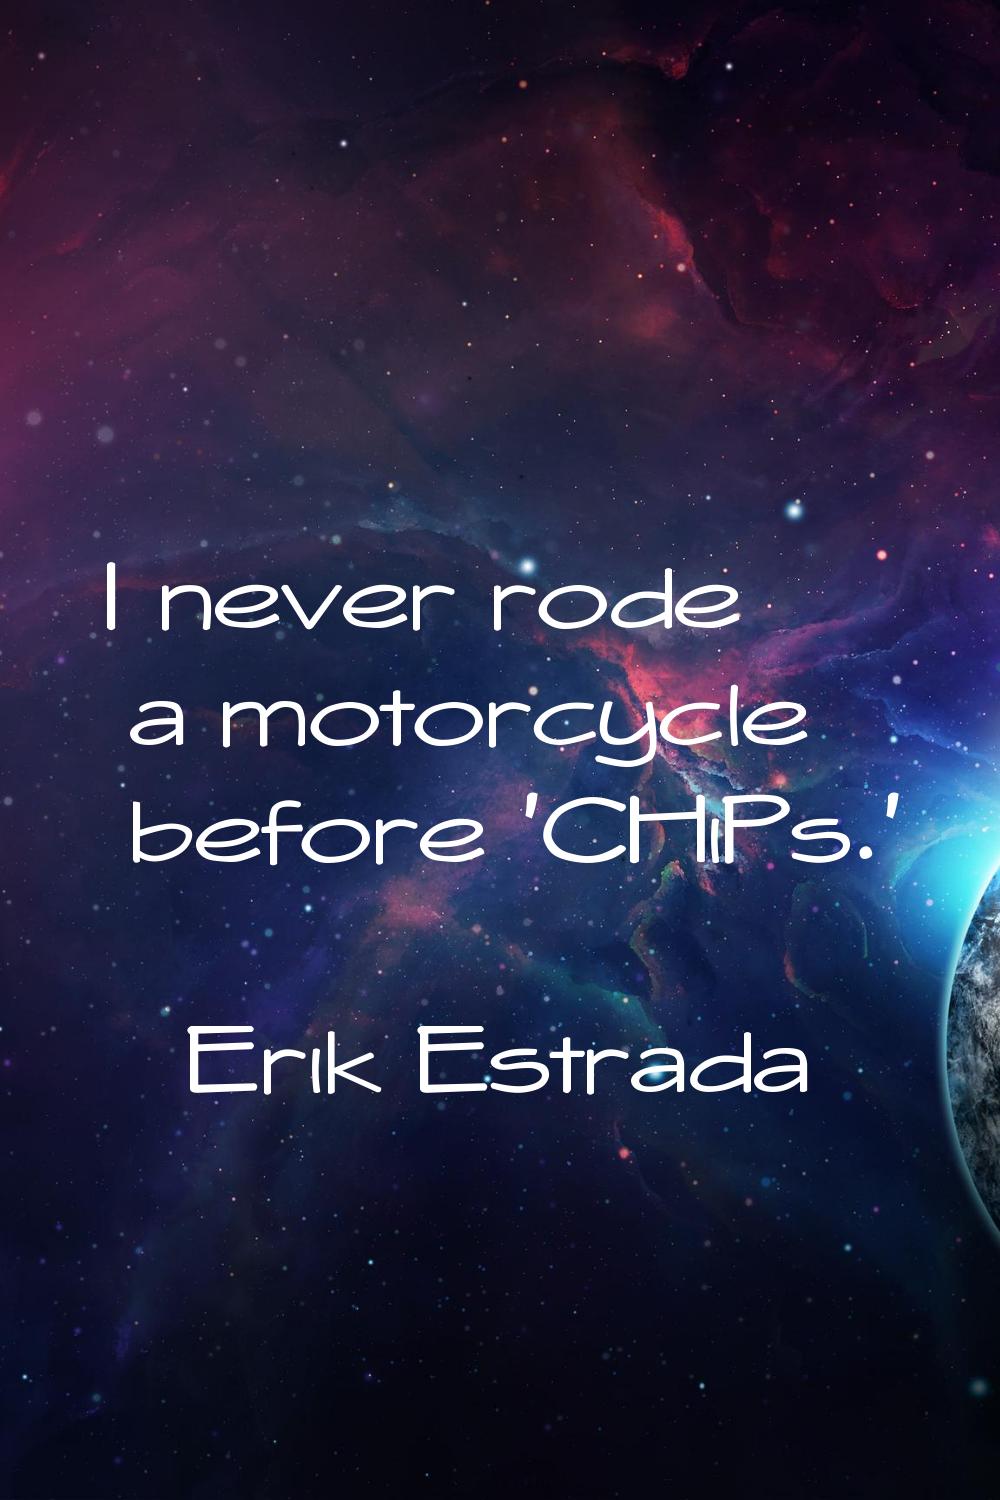 I never rode a motorcycle before 'CHiPs.'